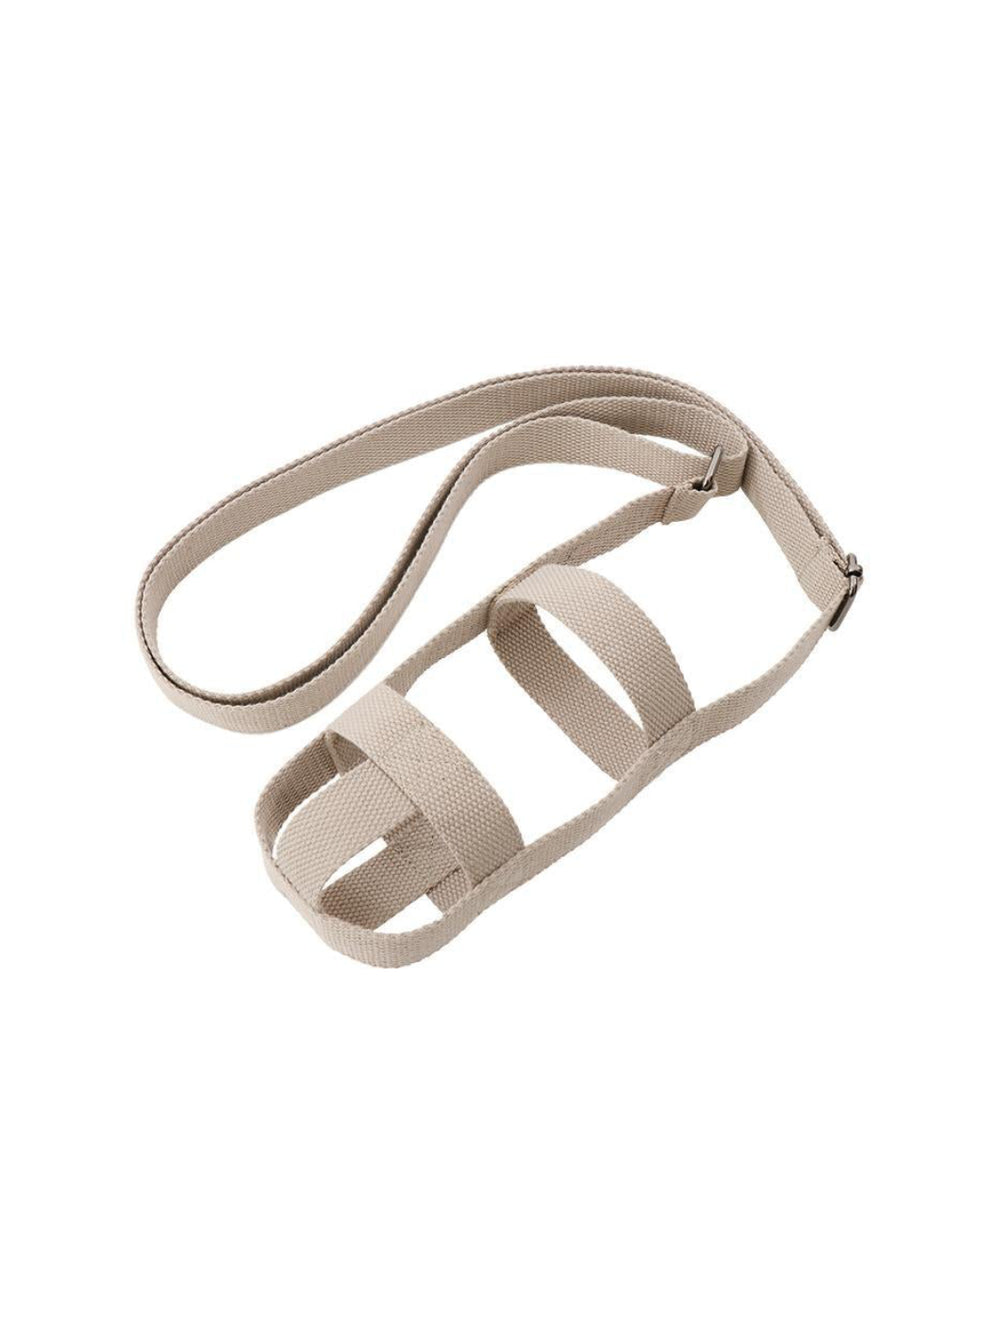 Photo of KINTO Tumbler Strap (Large) (80mm/3.2in) ( Beige ) [ KINTO ] [ Accessory ]